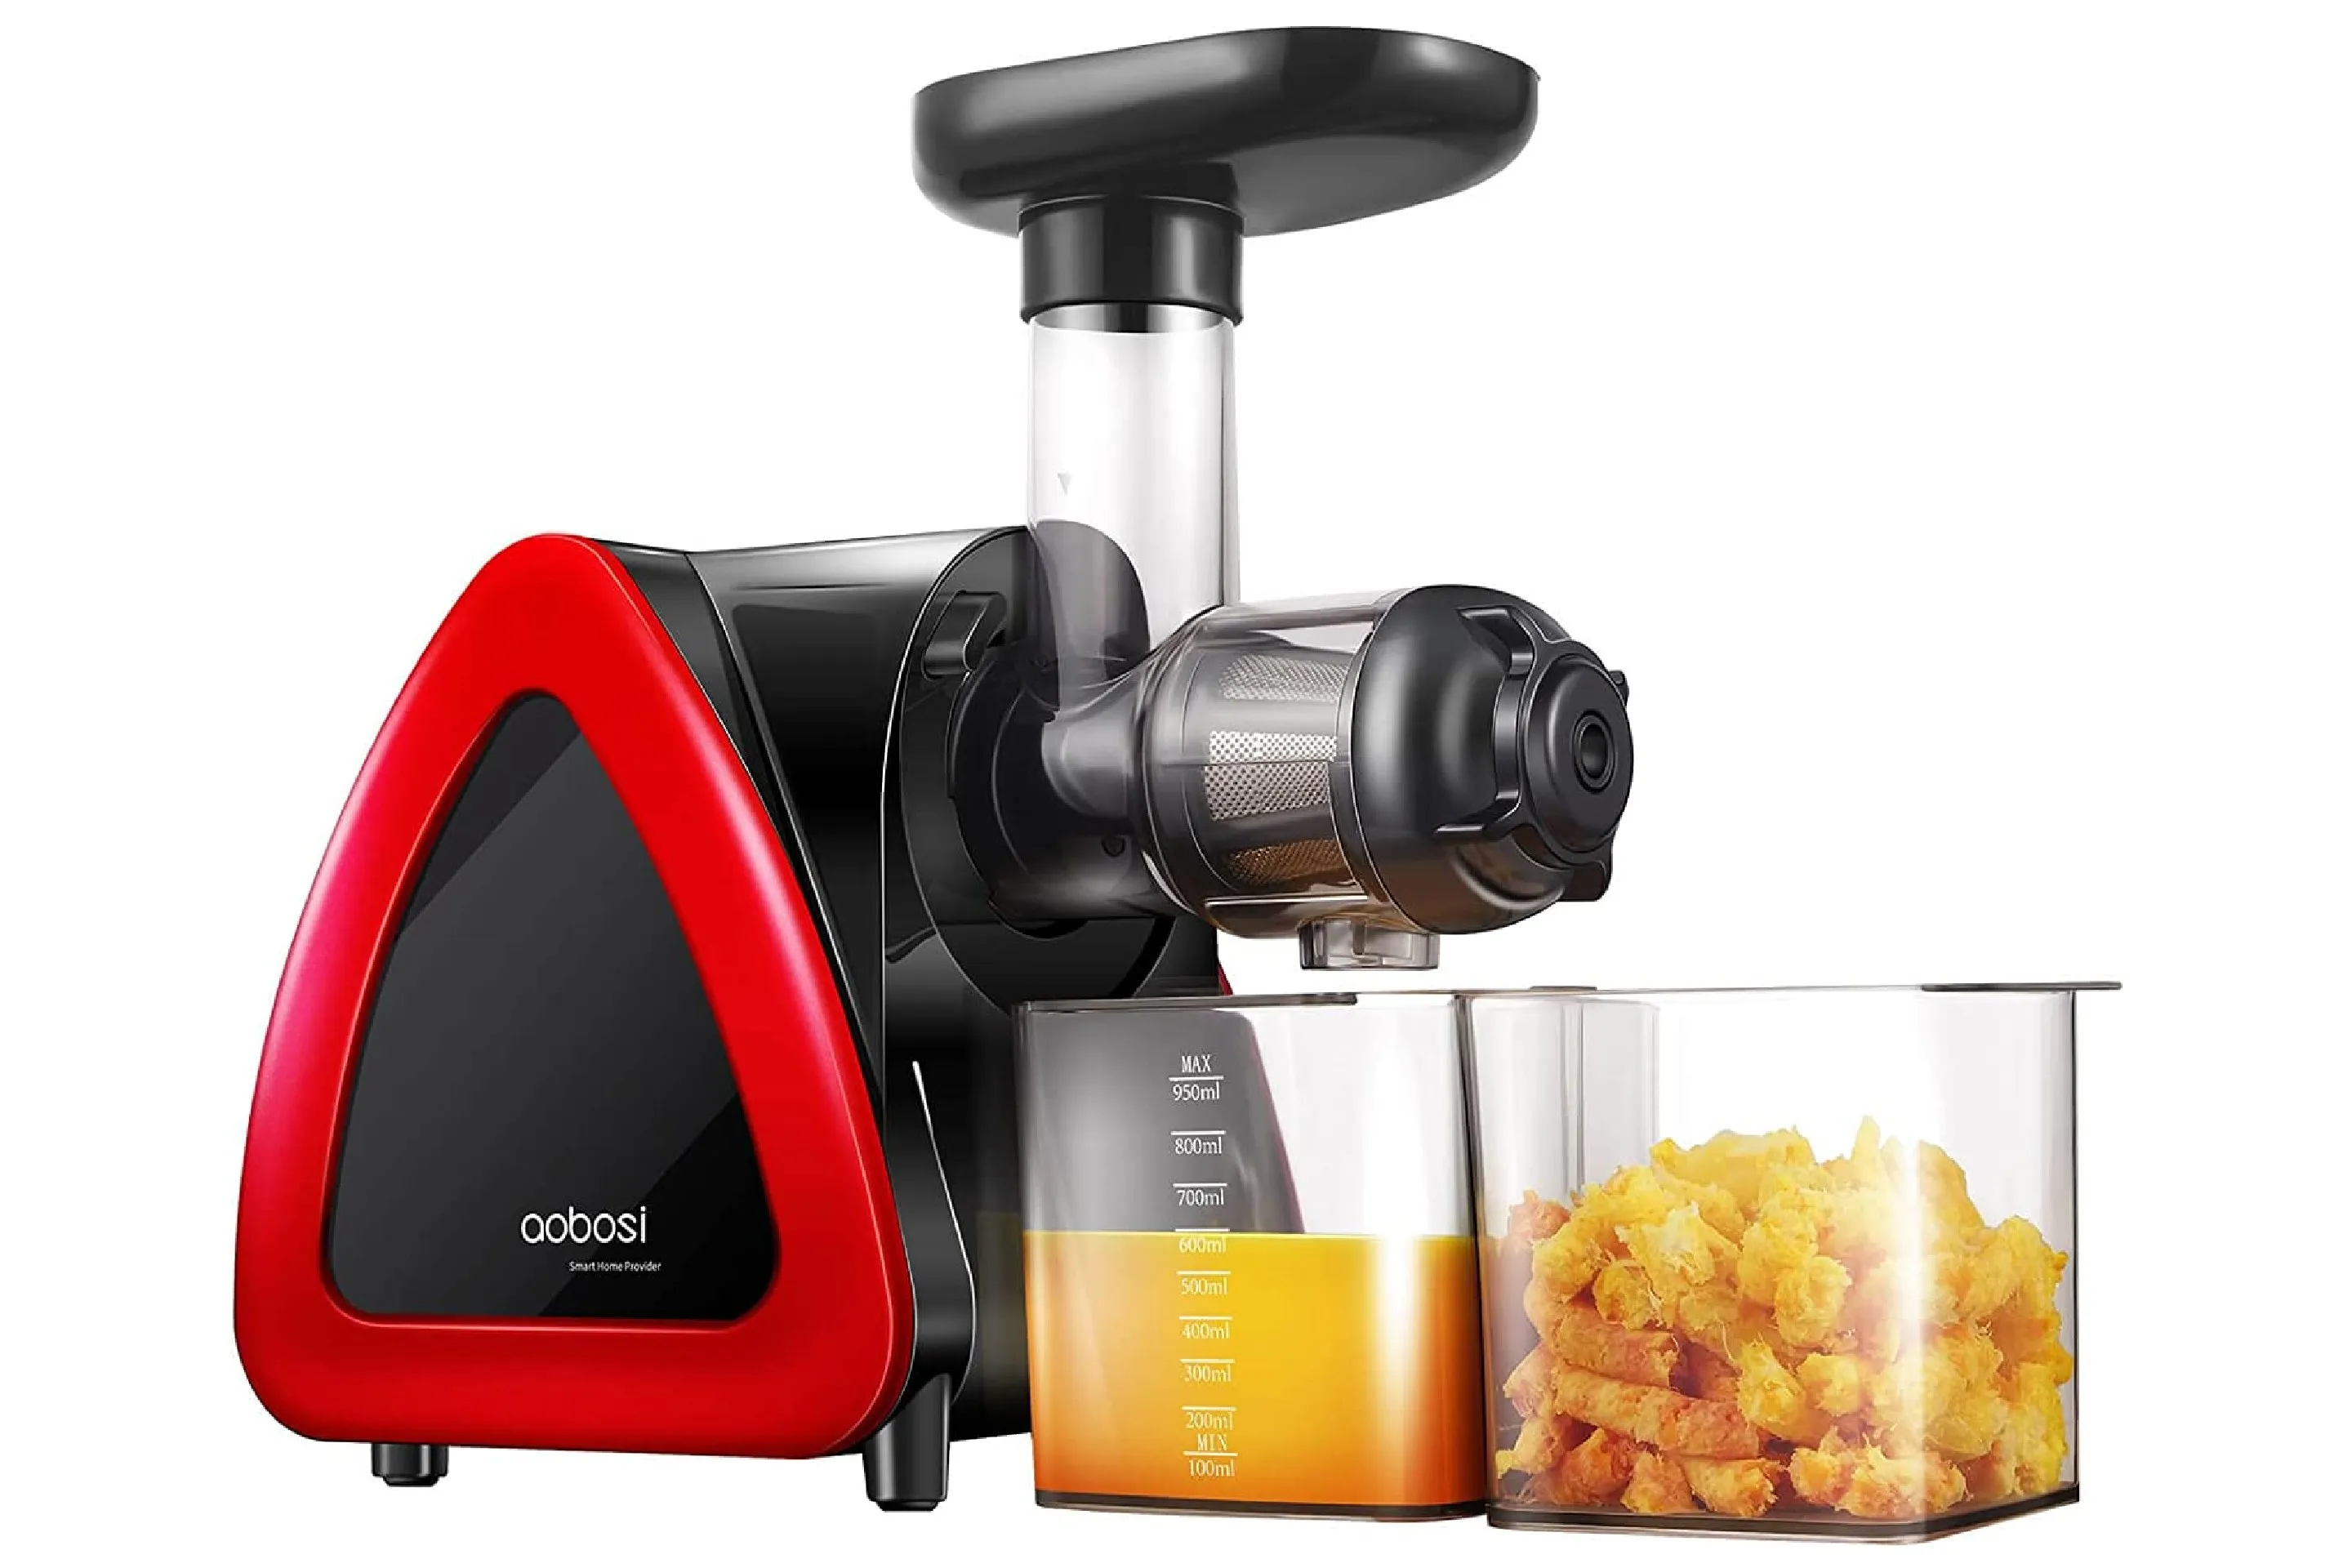 AMZCHEF Is One Of The Best Cheap Slow Juicers